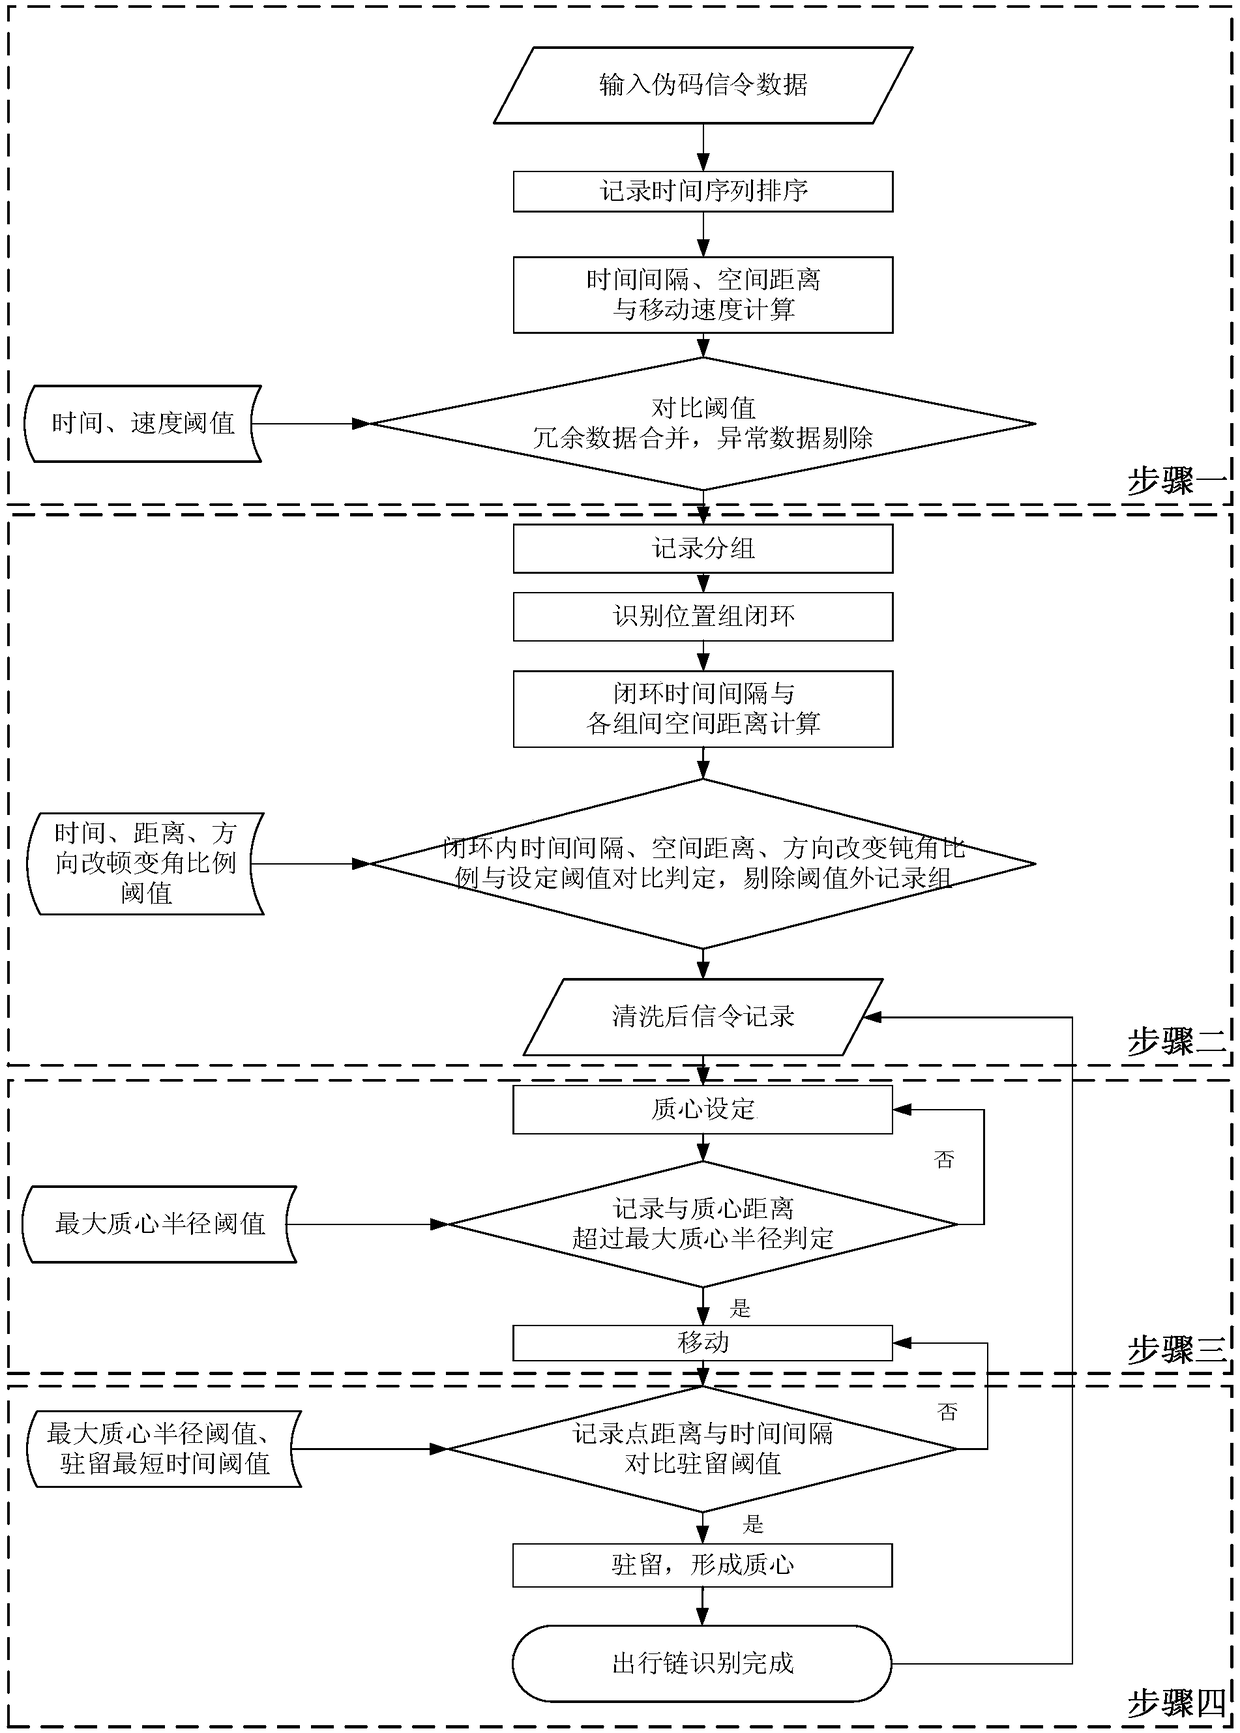 Pseudo code signaling data preprocessing and trip chain identification method